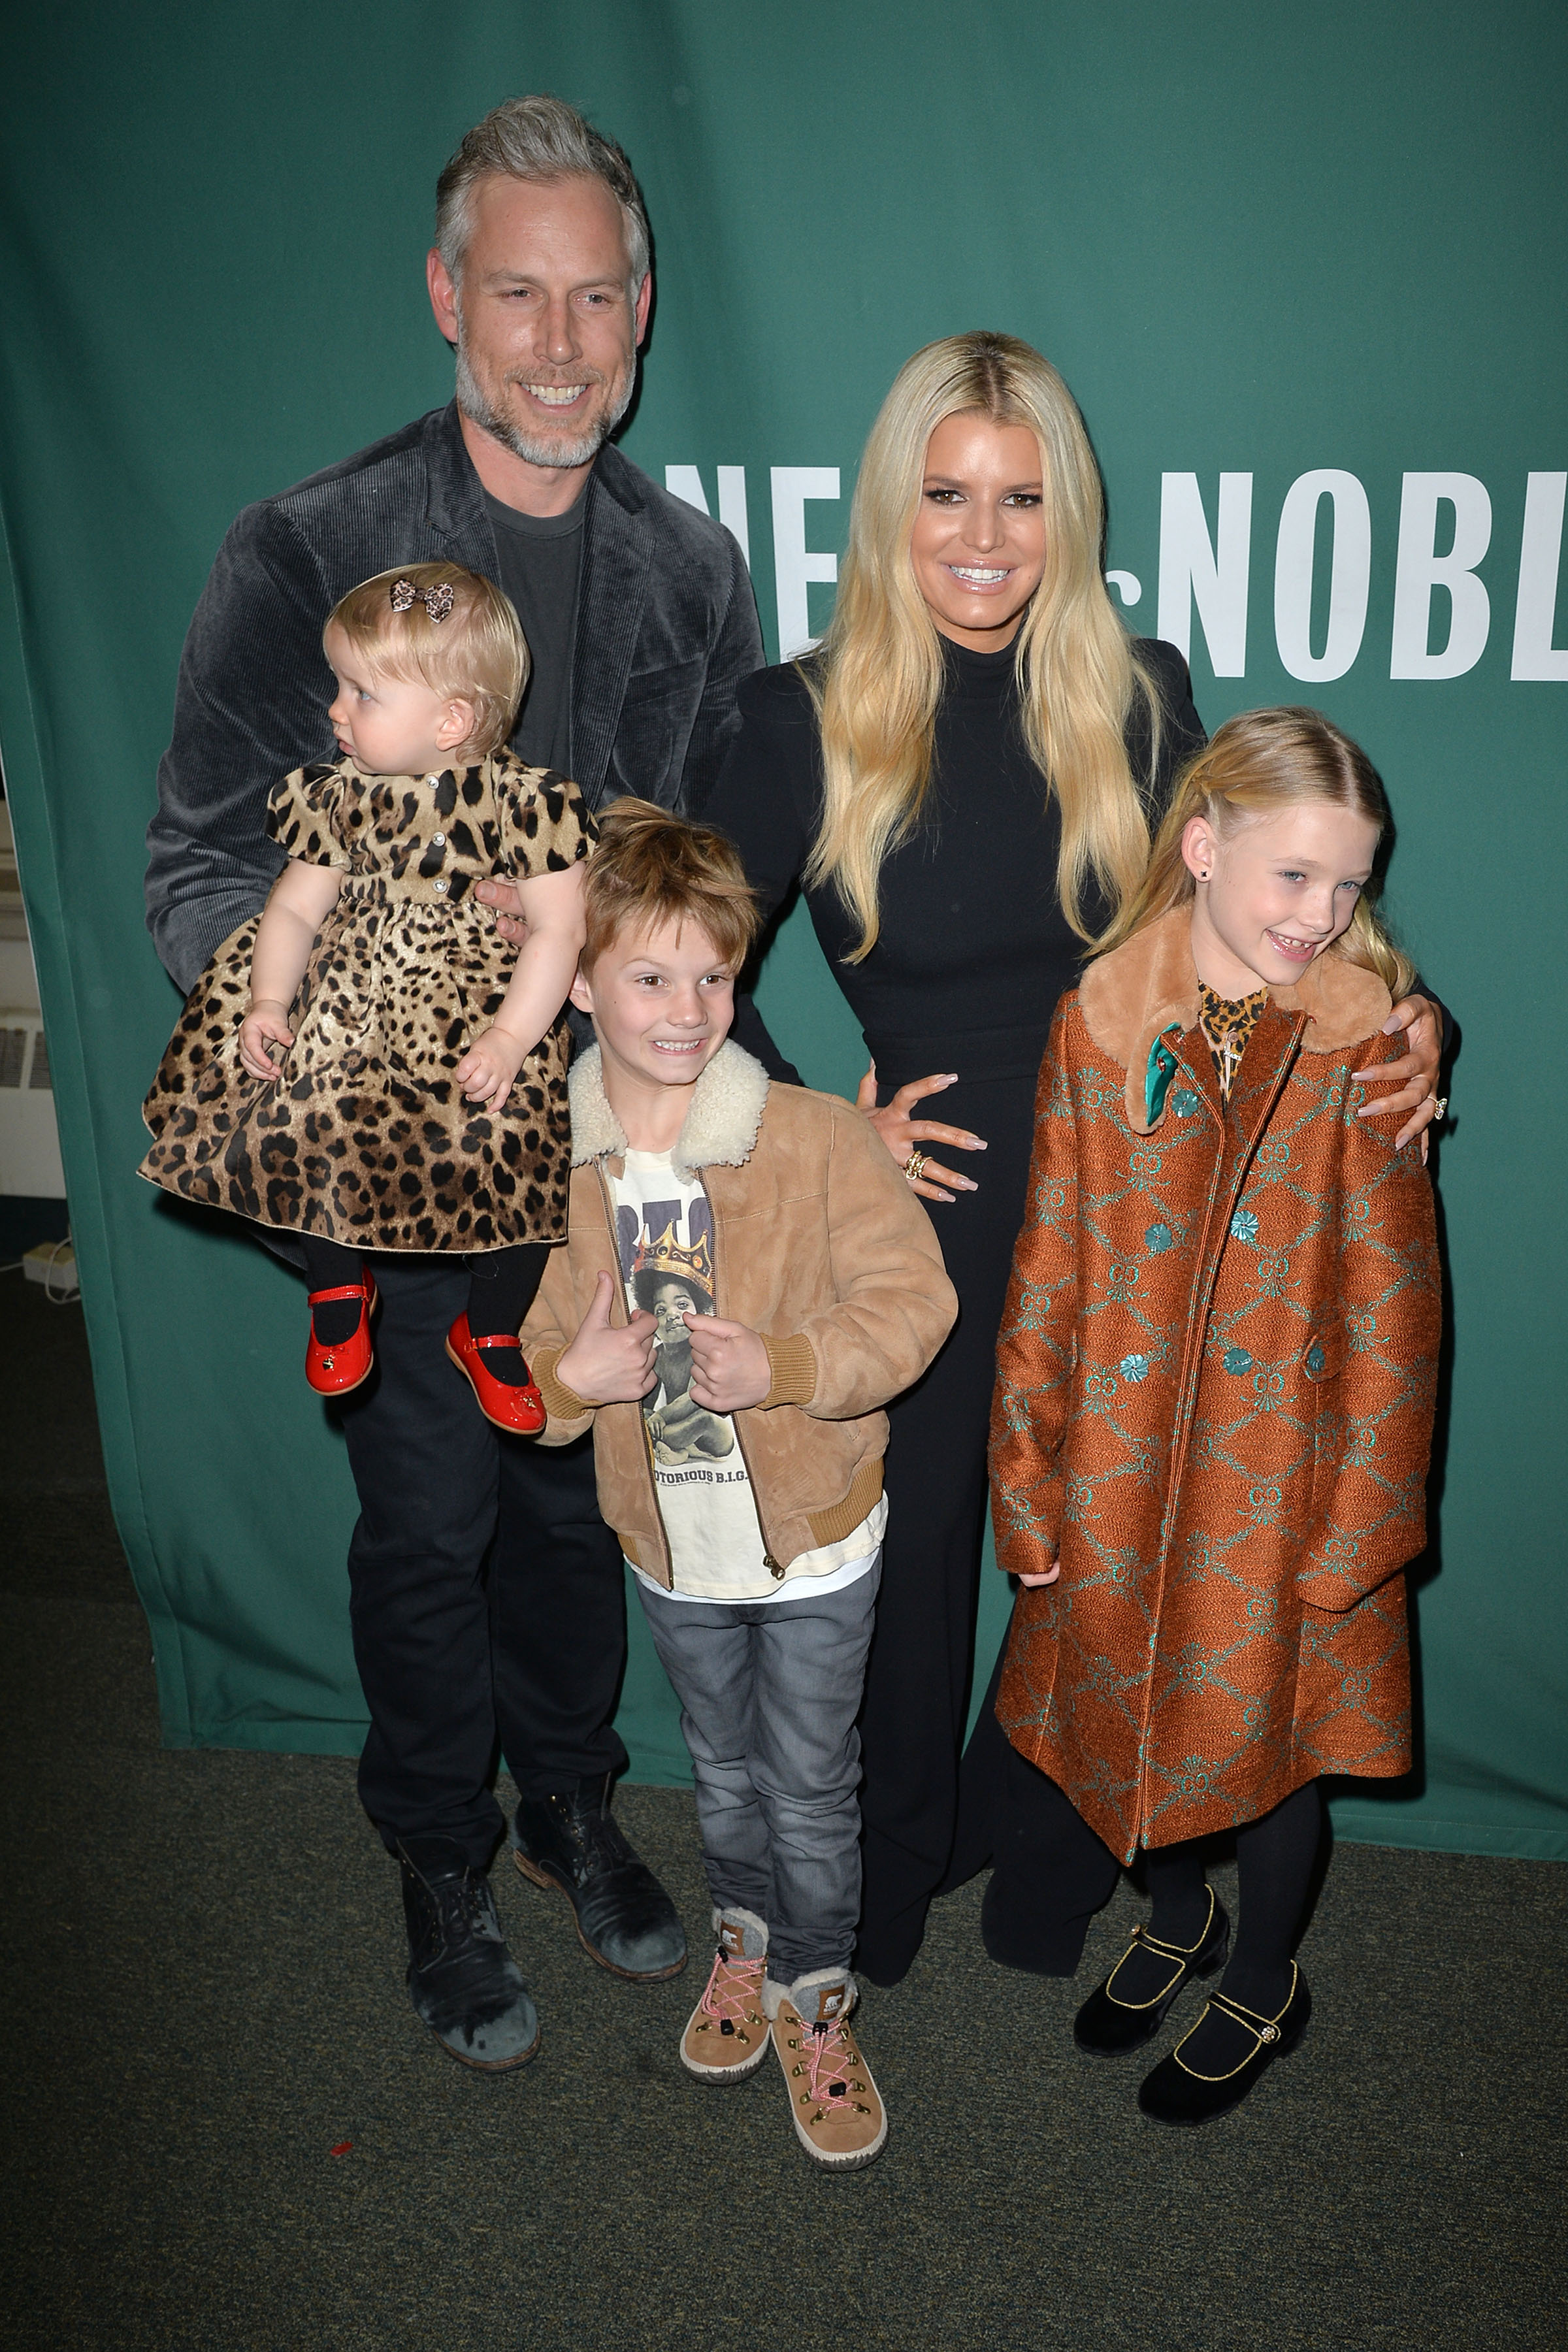 Jessica Simpson and Eric Johnson's Relationship Timeline